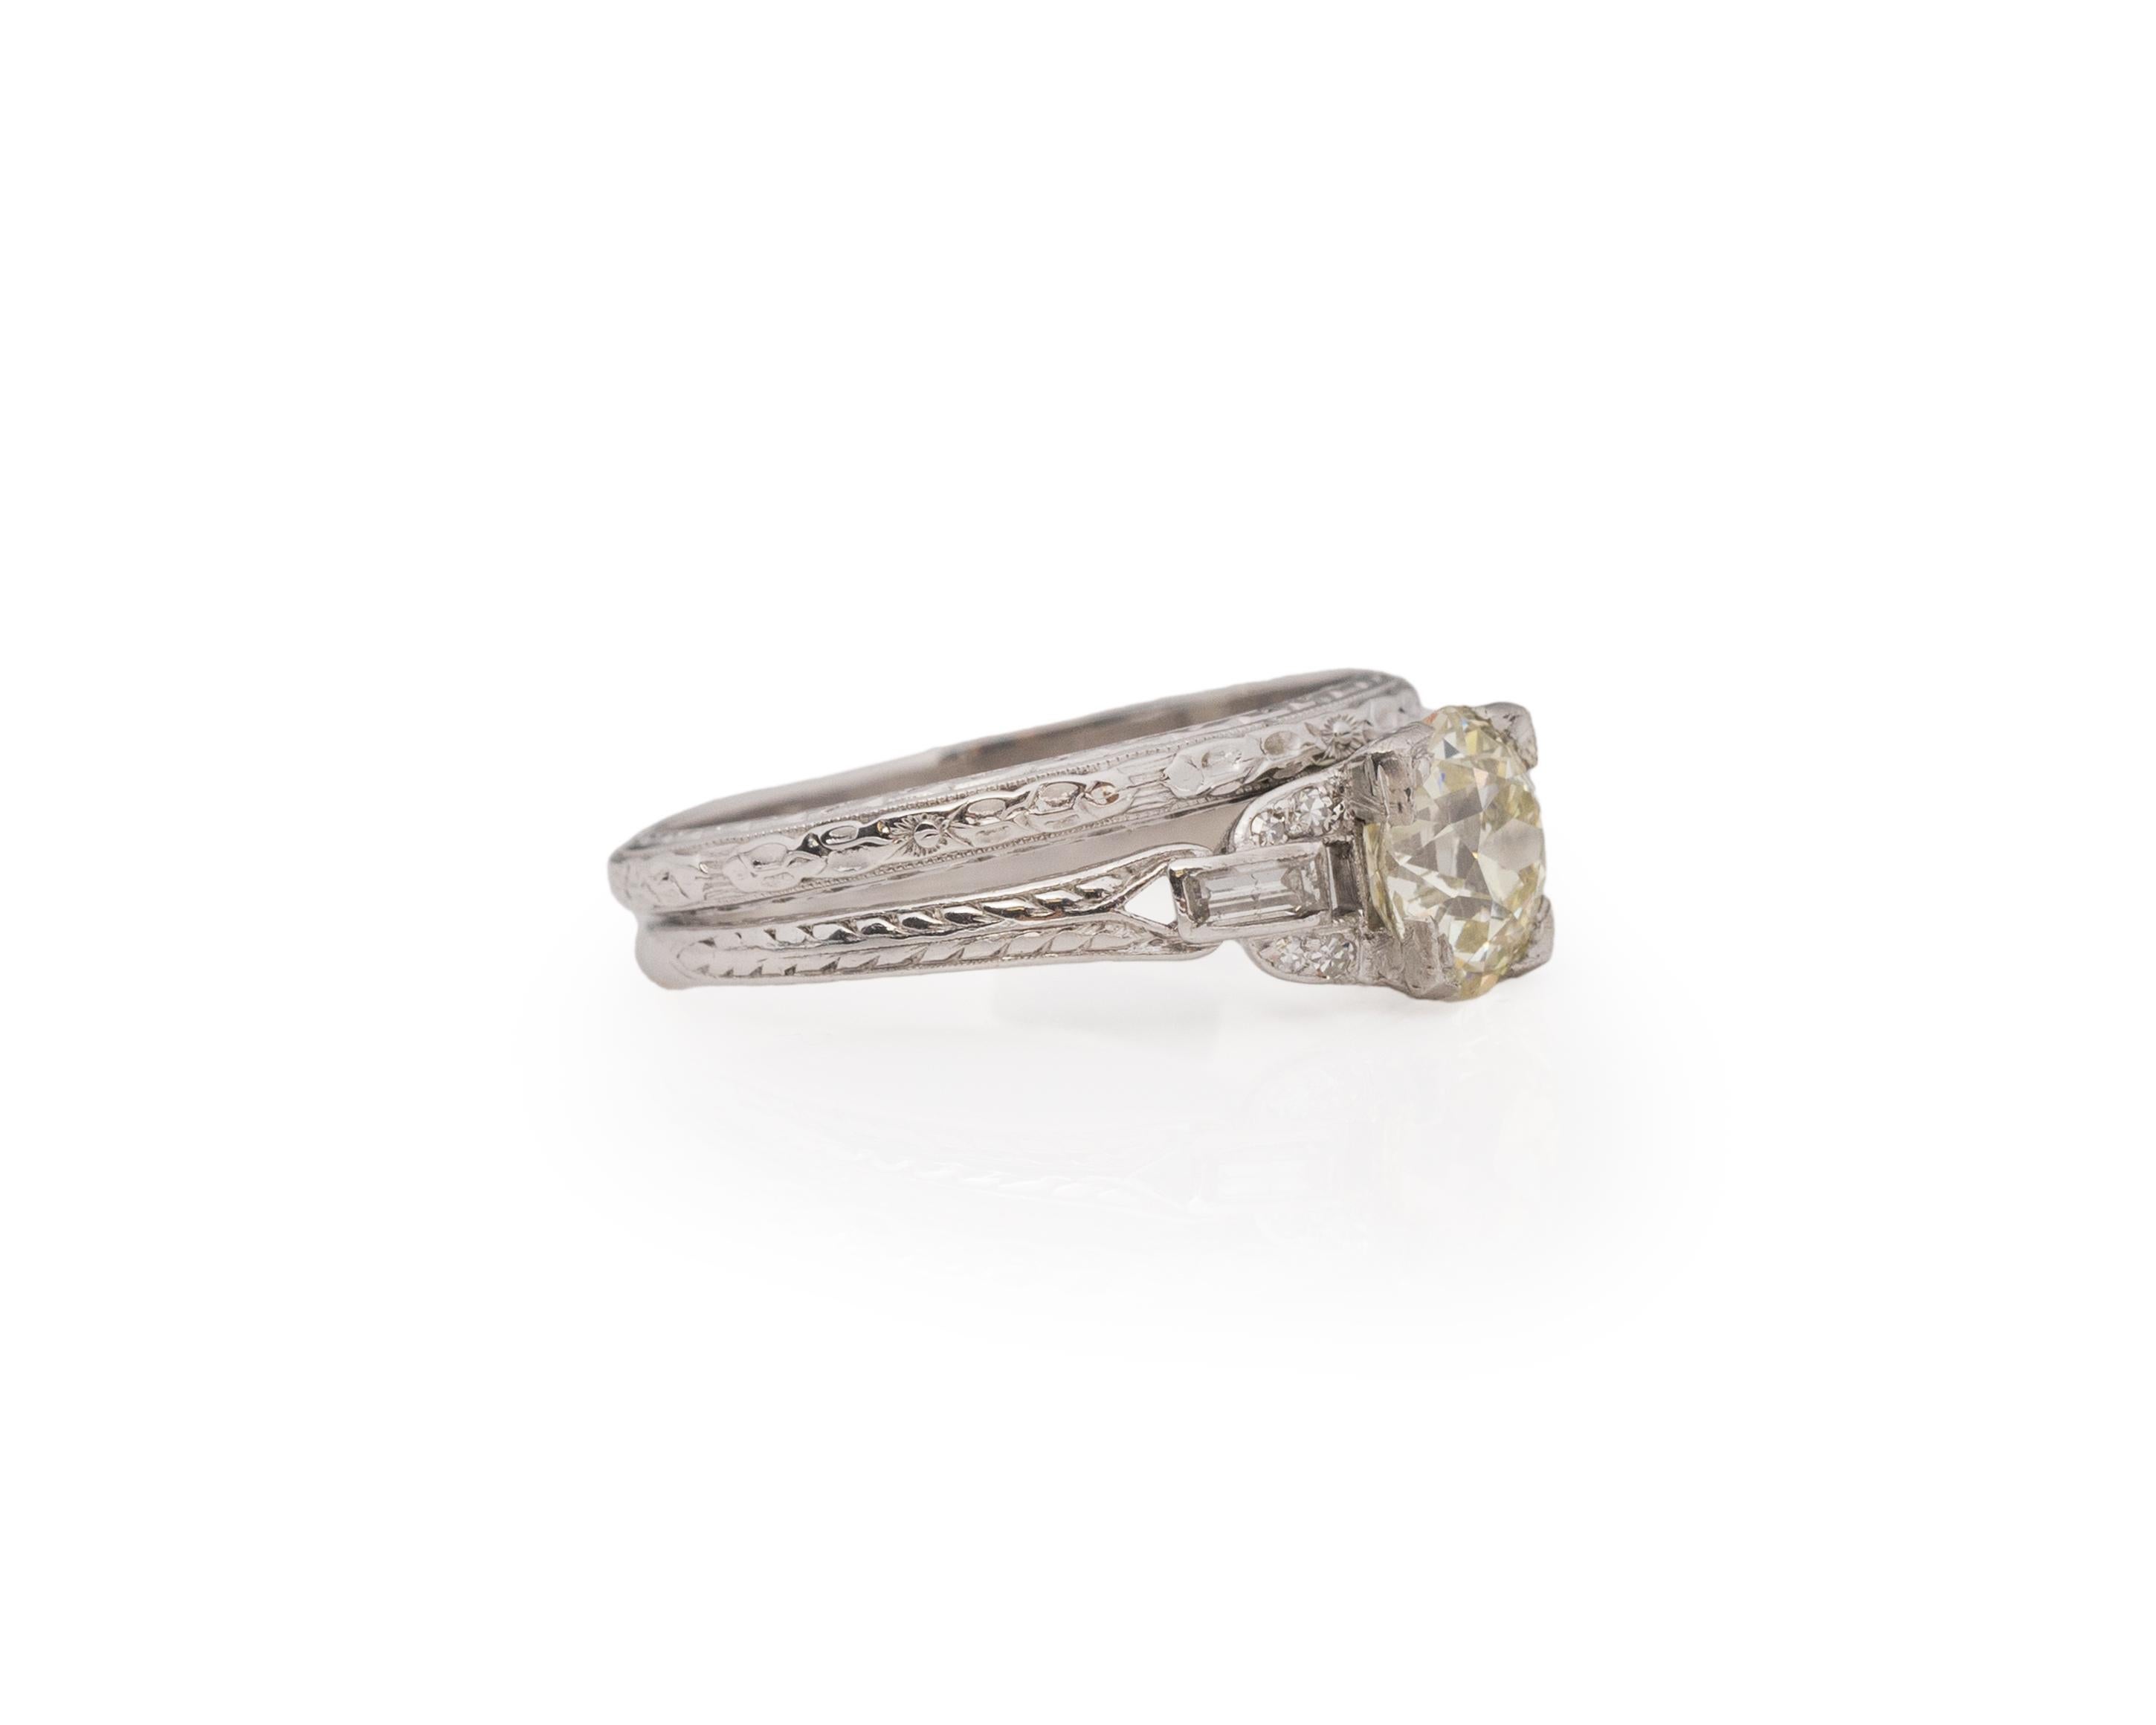 Ring Size: 8.25
Metal Type: Platinum [Hallmarked, and Tested]
Weight: 5.3 grams

Center Diamond Details:
Weight: 1.55ct
Cut: Old European brilliant
Color: O-P (Light Yellow)
Clarity: VS

Finger to Top of Stone Measurement: 6mm
Condition: Excellent